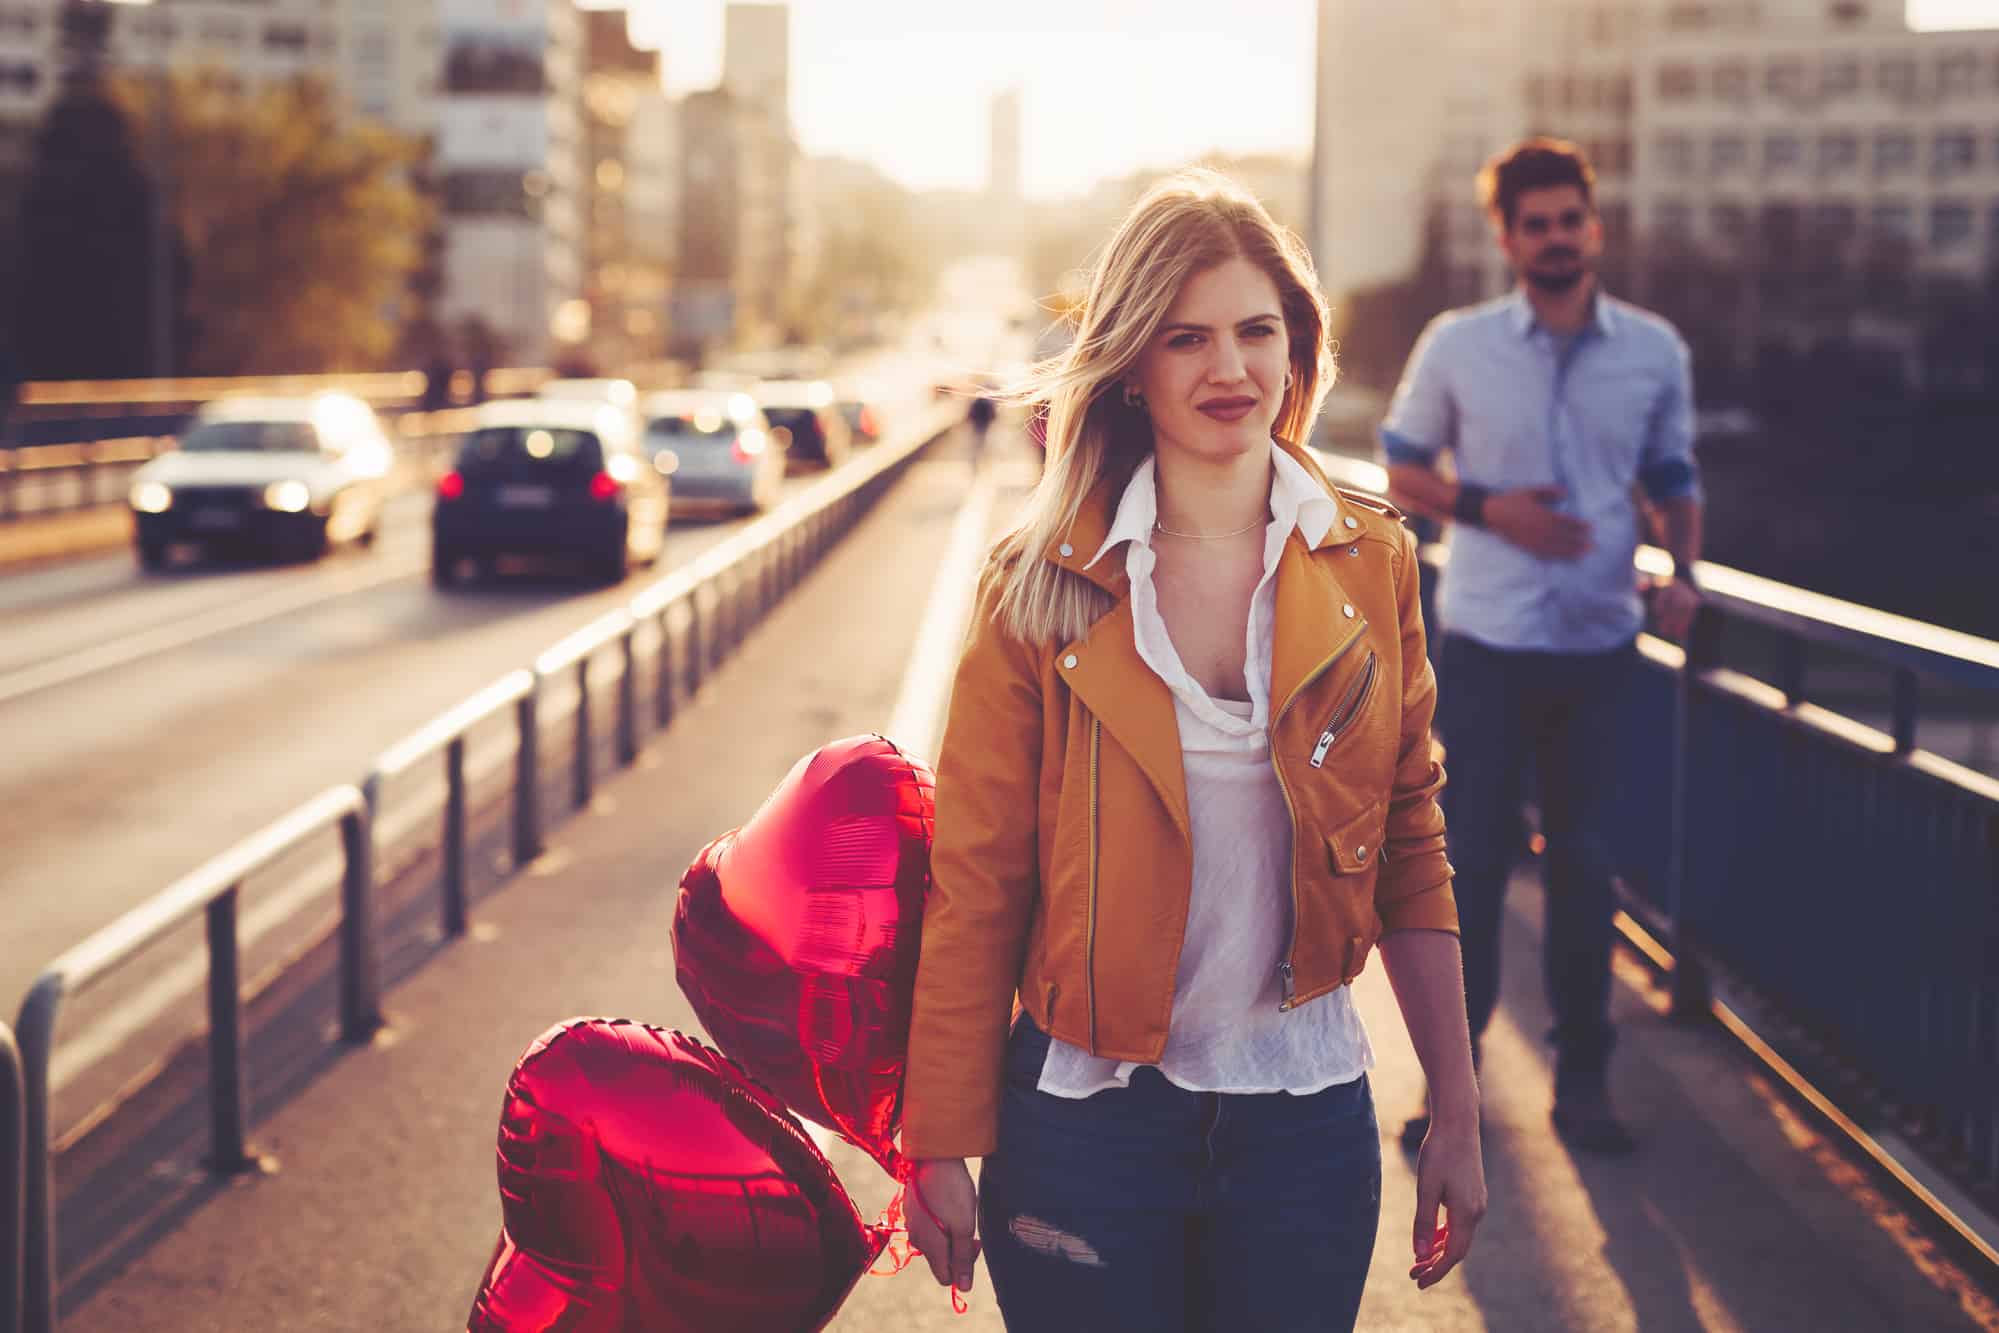 Why walking away builds attraction